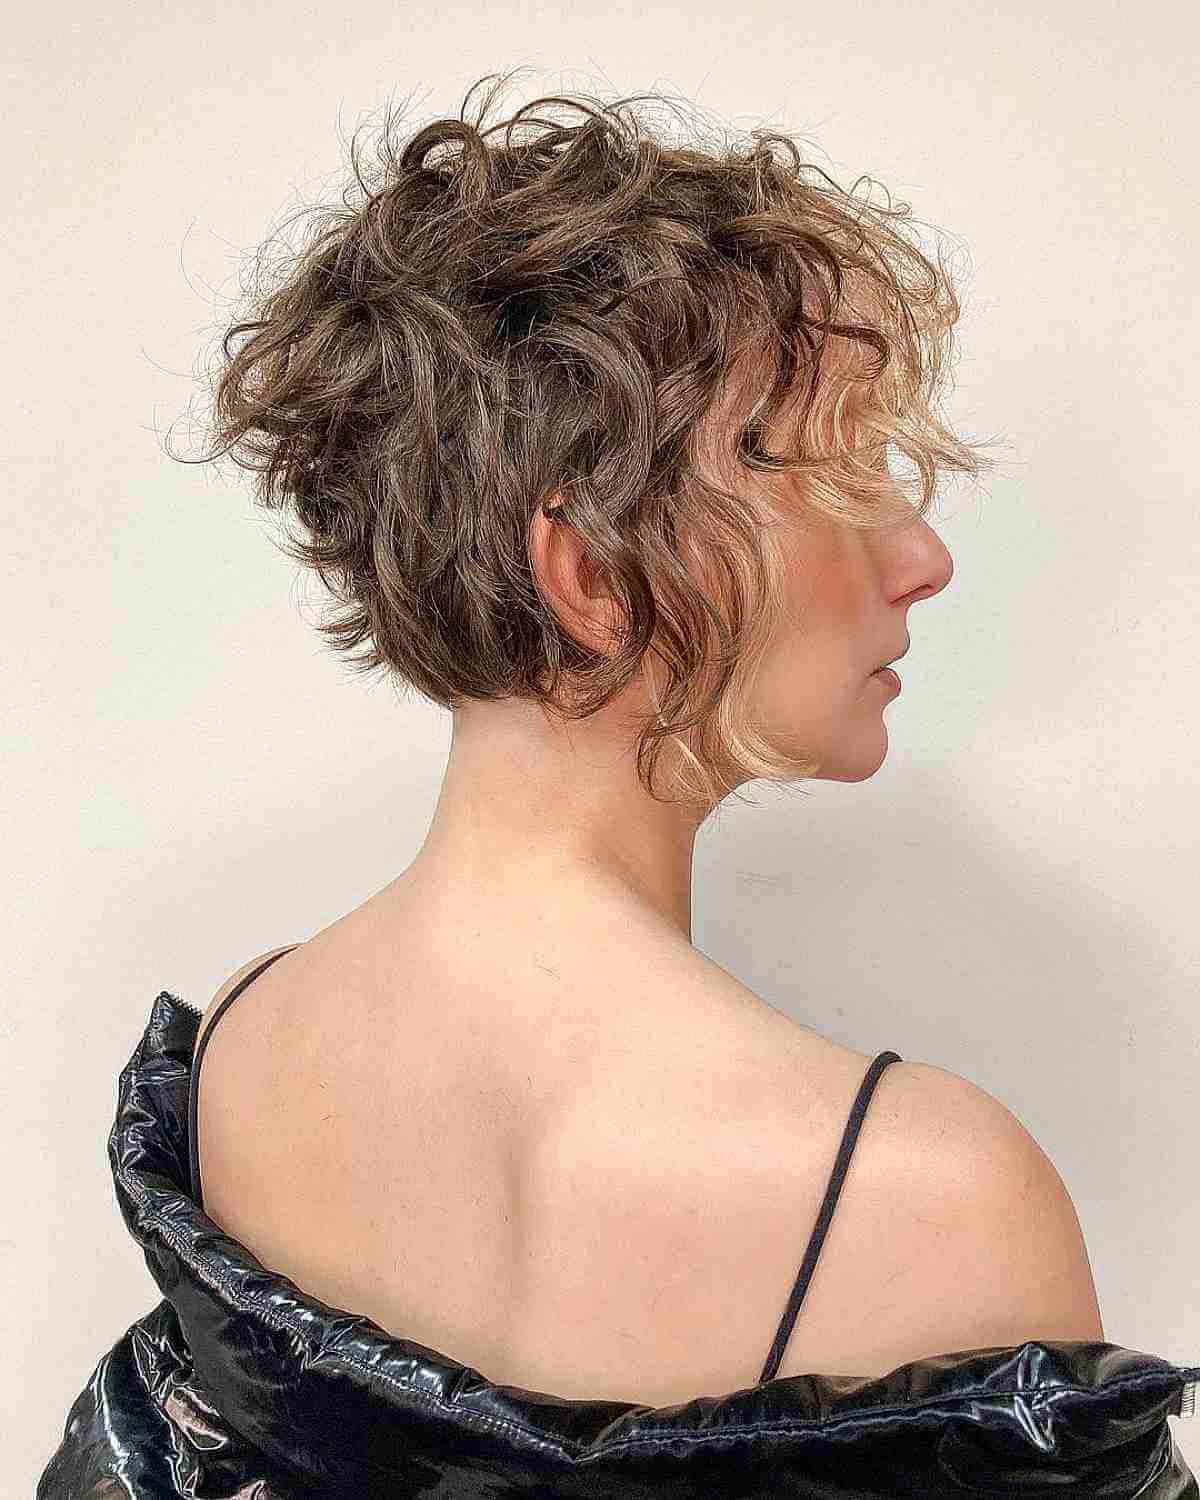 100+ Short Hairstyles for Thin, Fine Hair to Appear Thick &amp; Full